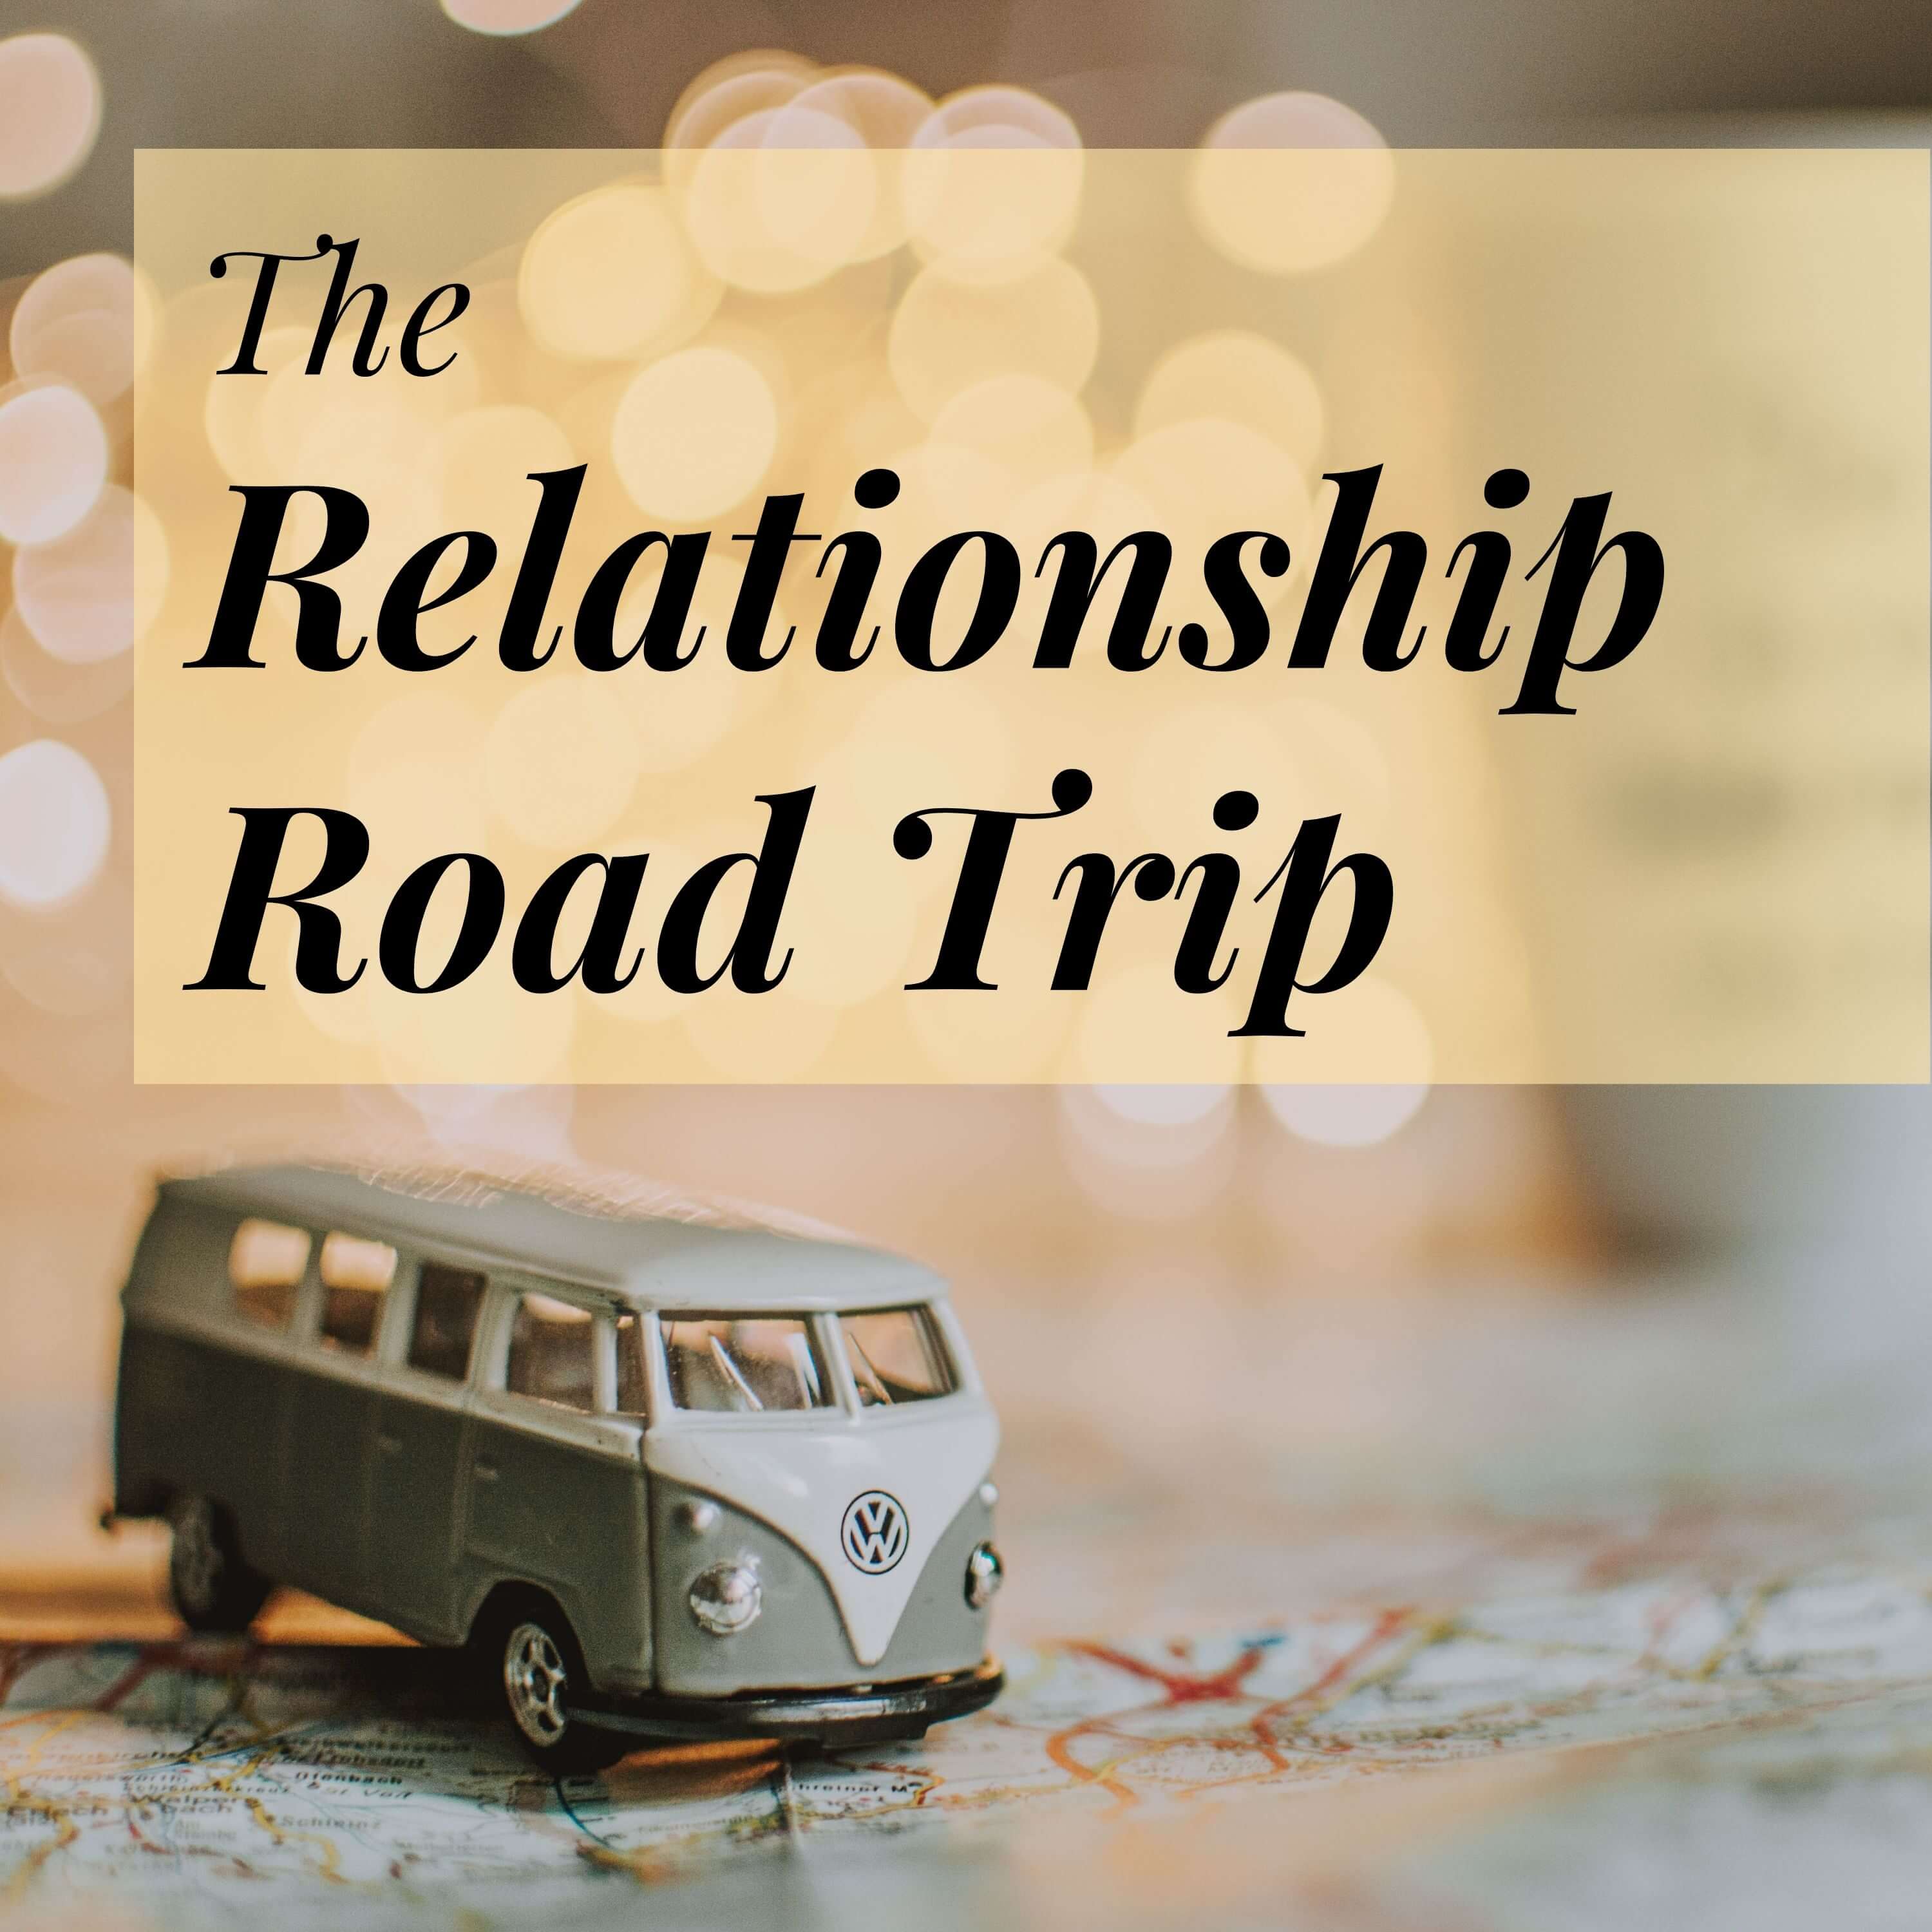 The Relationship Road Trip